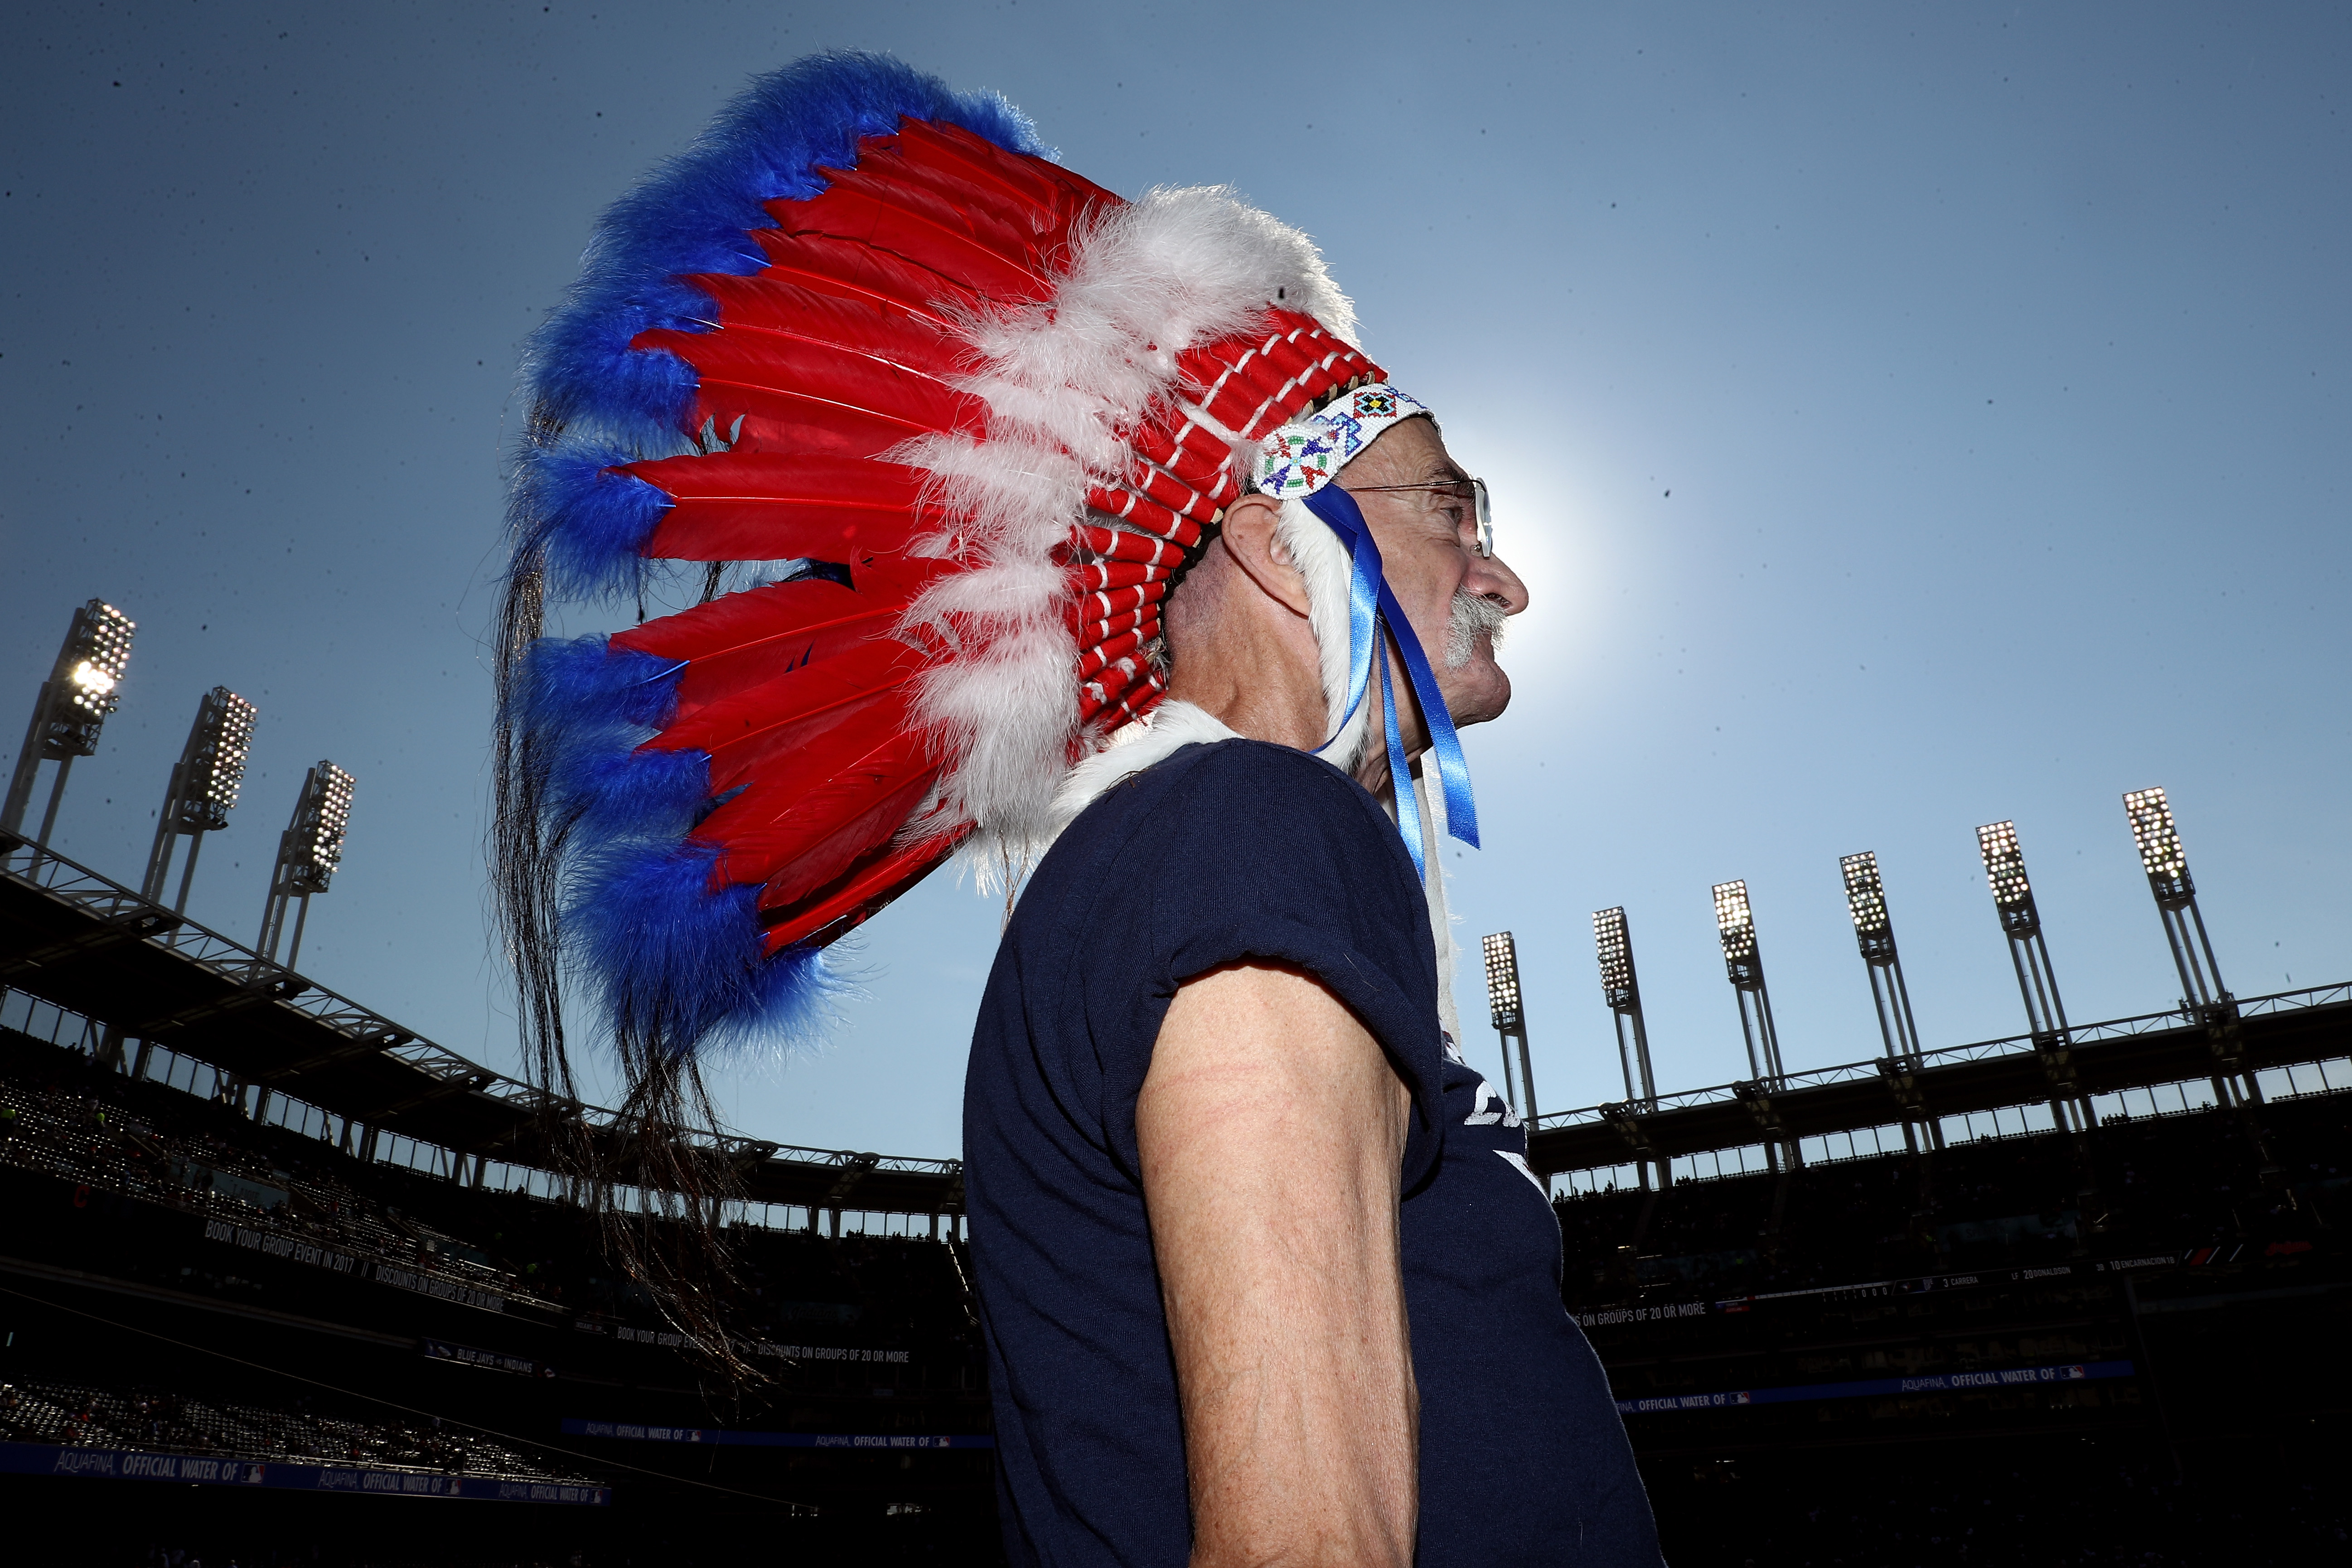 Cleveland Indians will refuse entry to fans in offensive dress